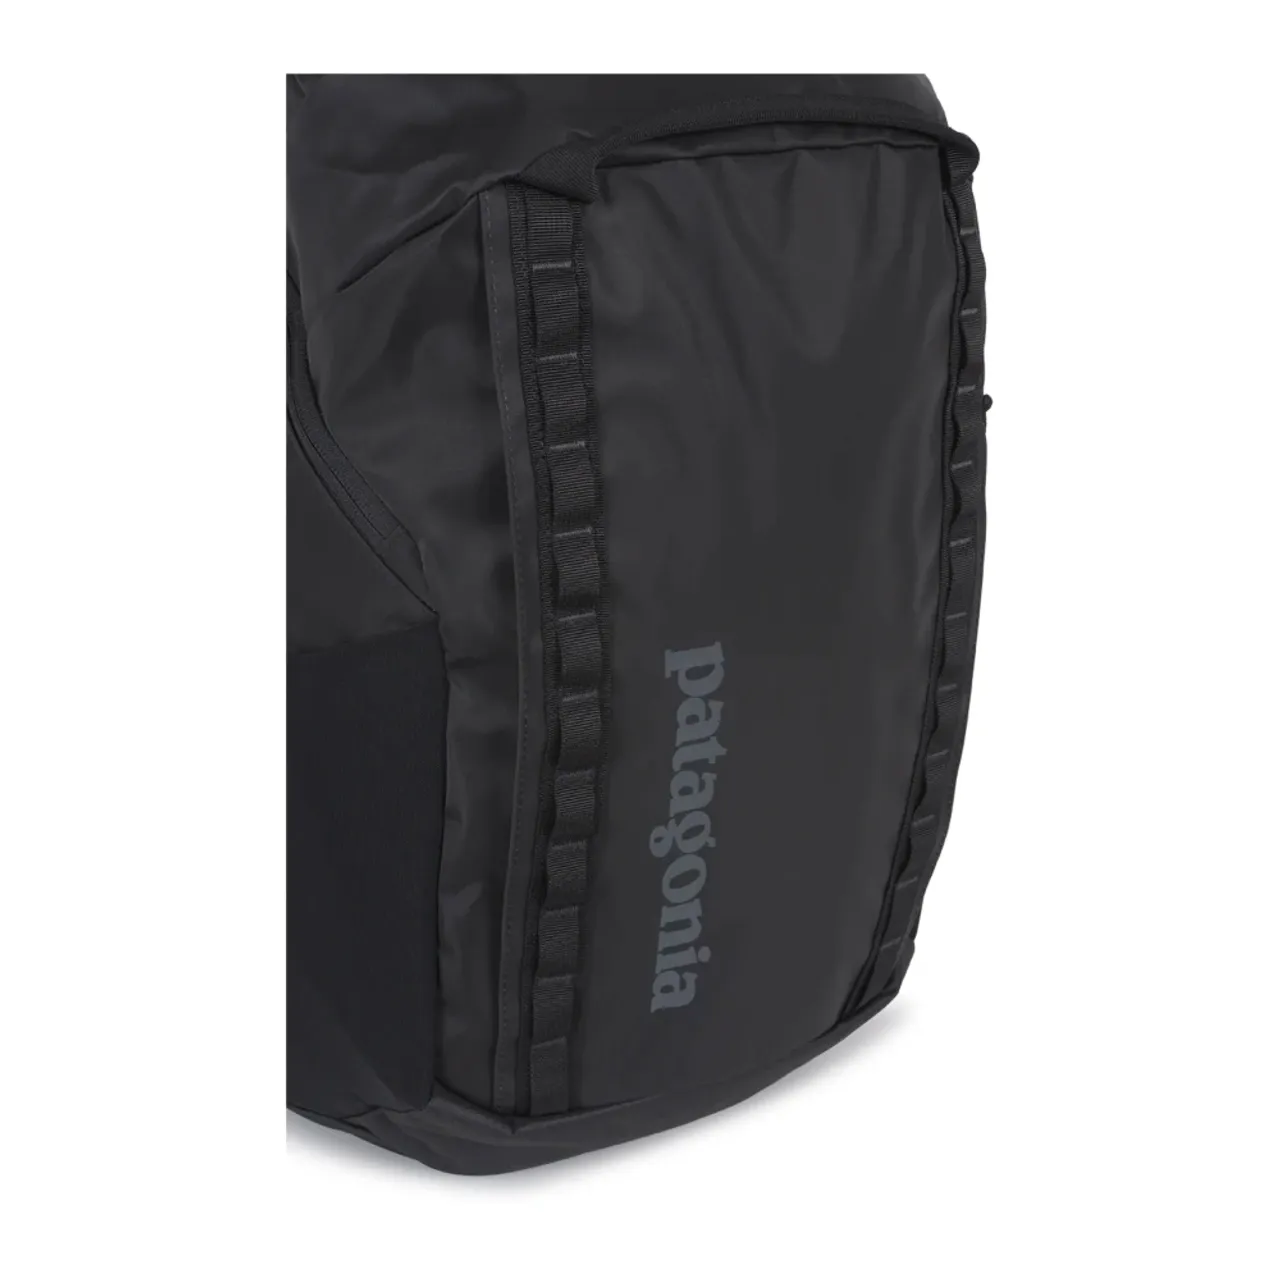 Patagonia , Black Hole Pack Bags ,Black male, Sizes: ONE SIZE